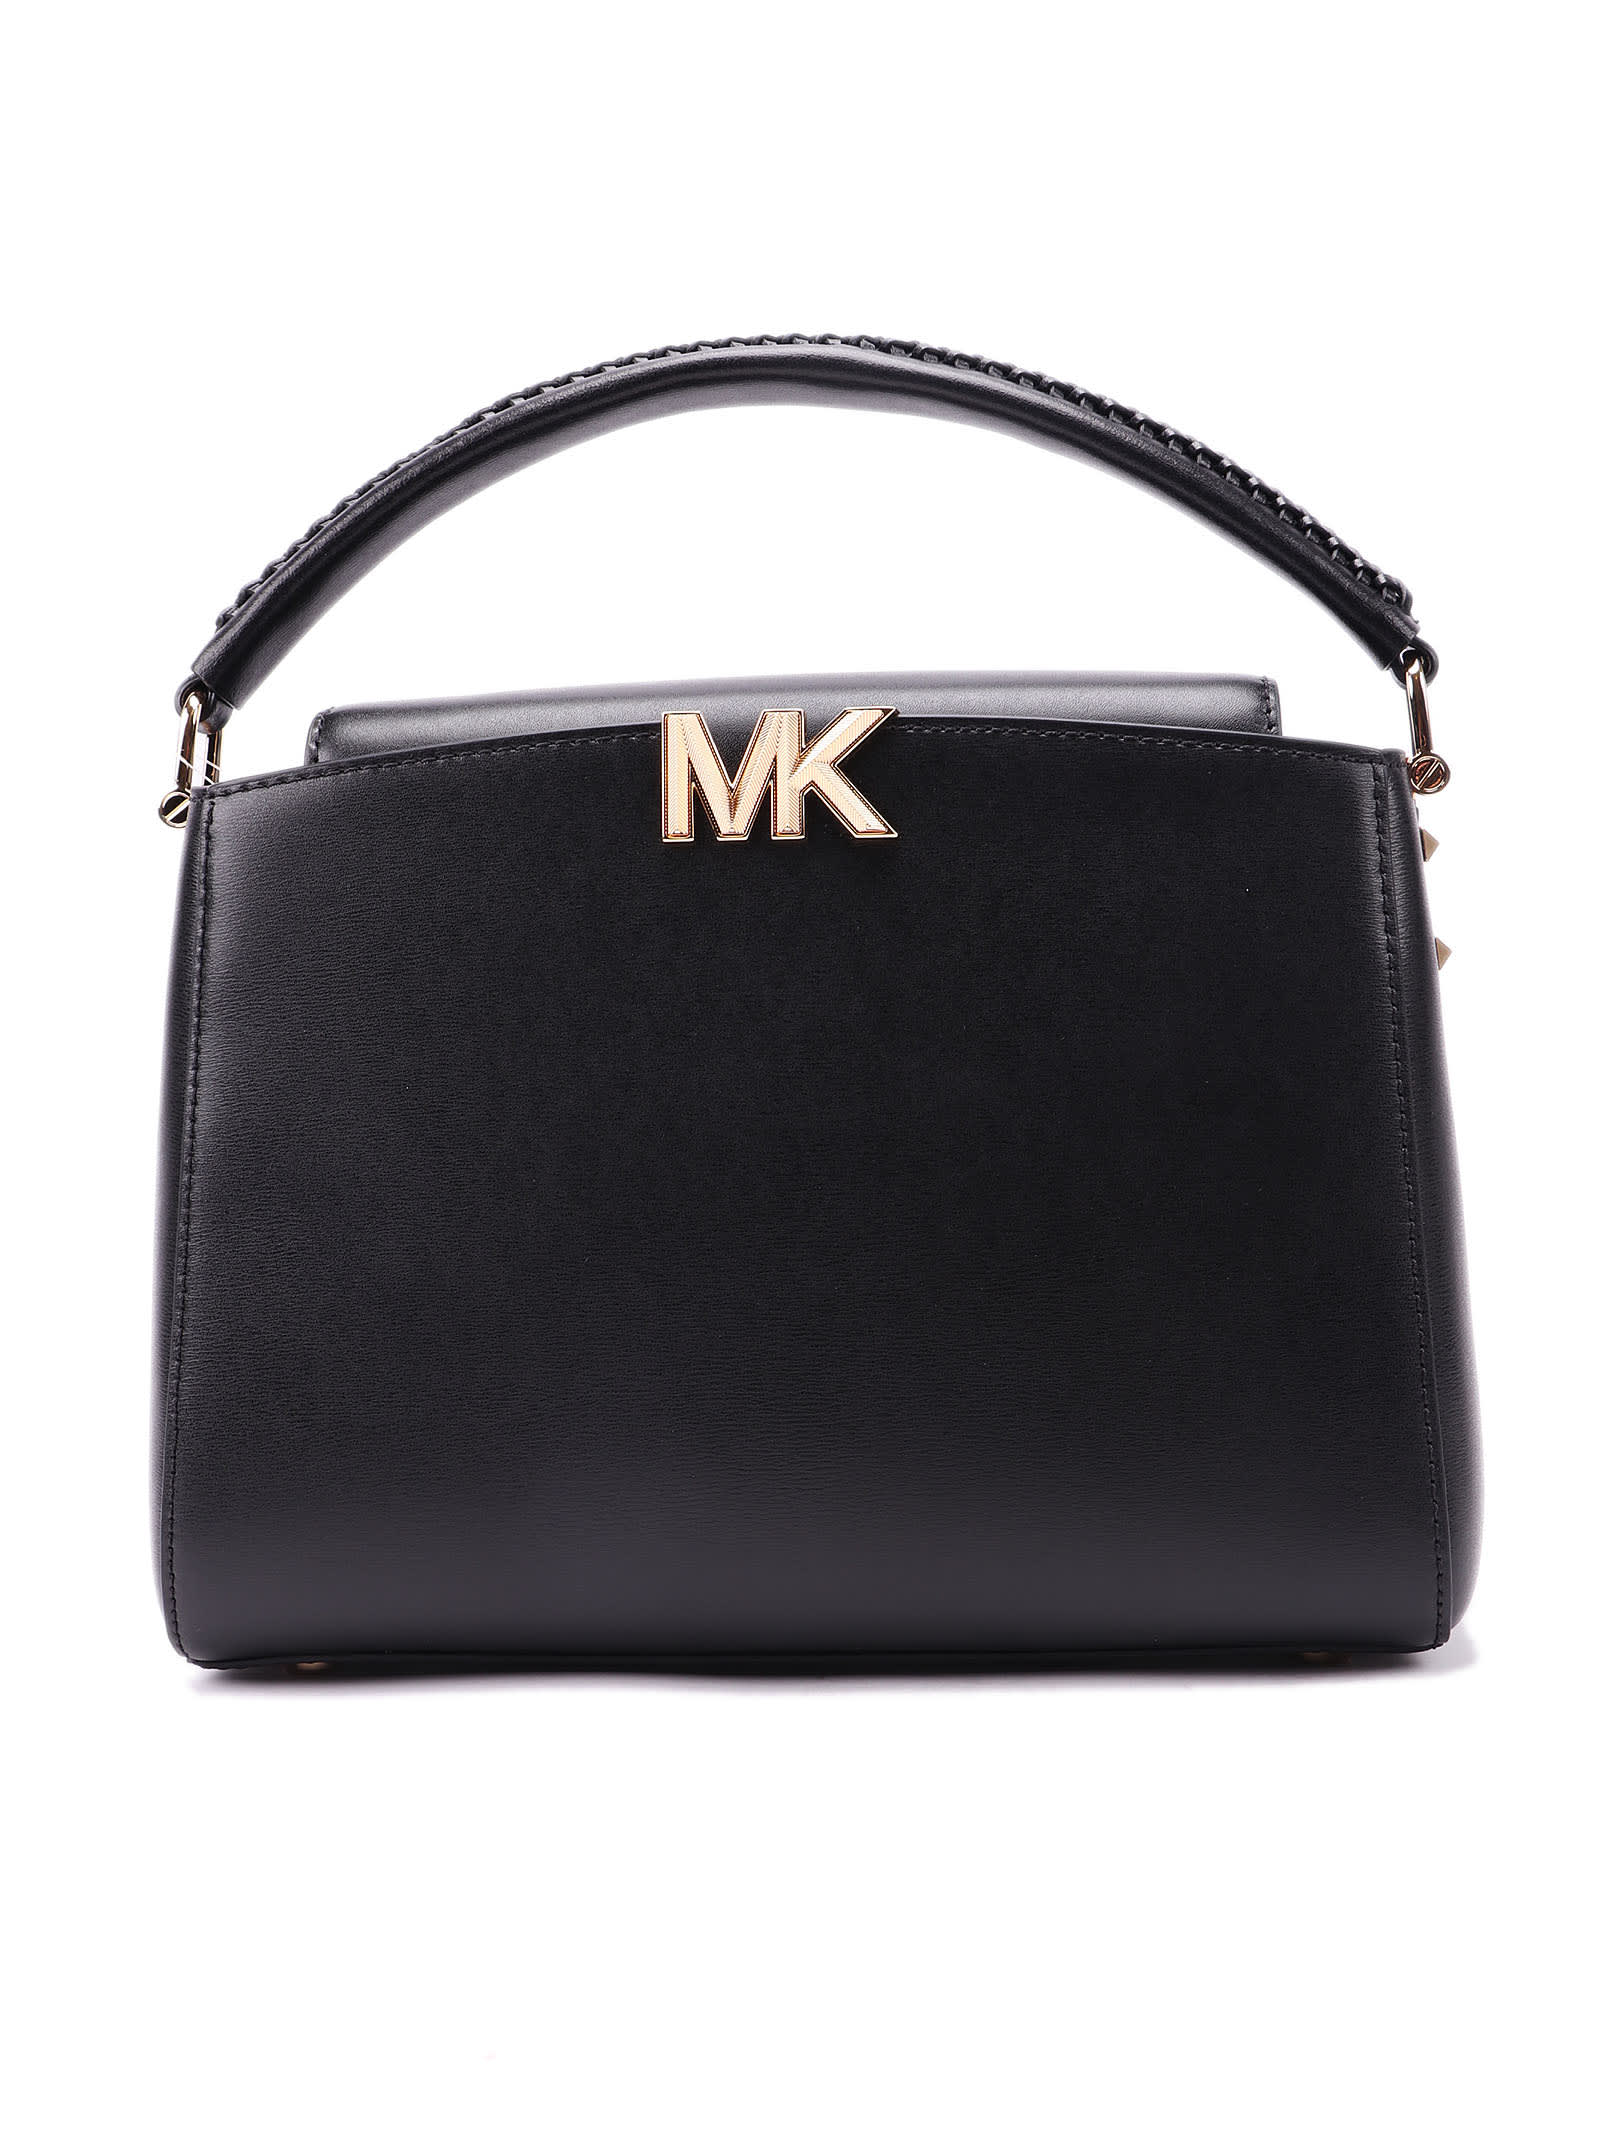 Michael Kors Collection Md Th Satchel